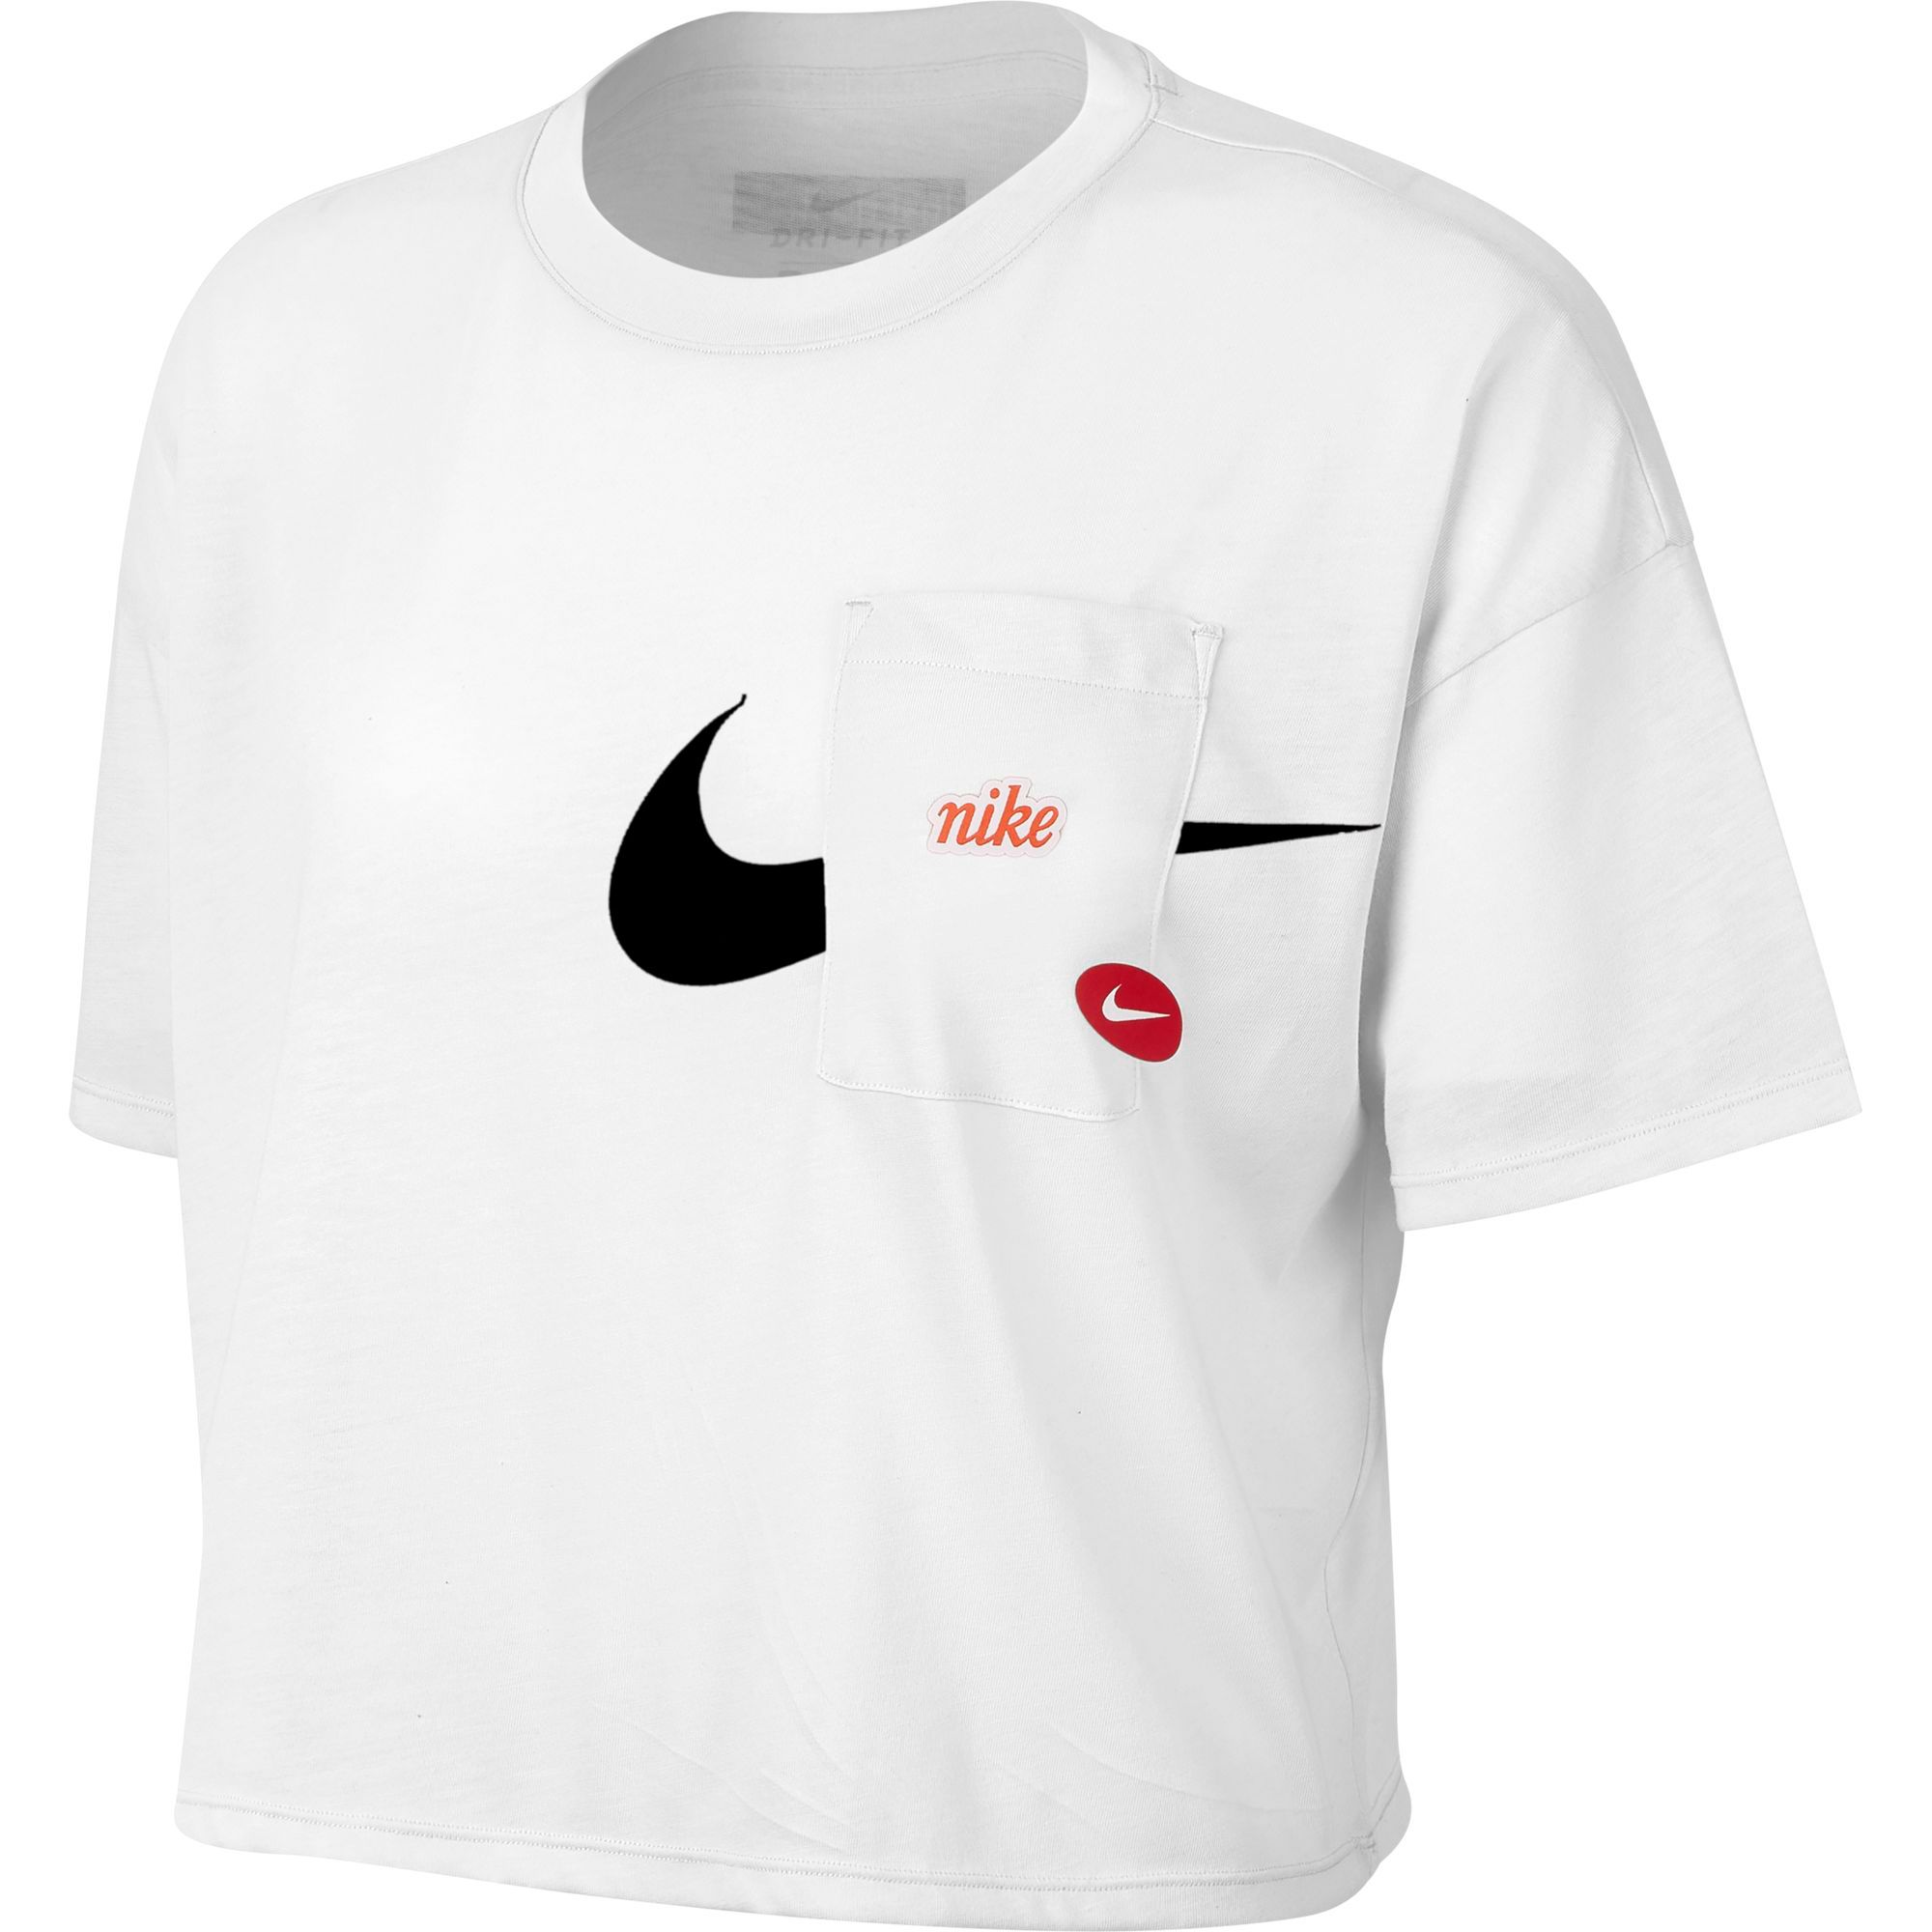 cropped nike just do it